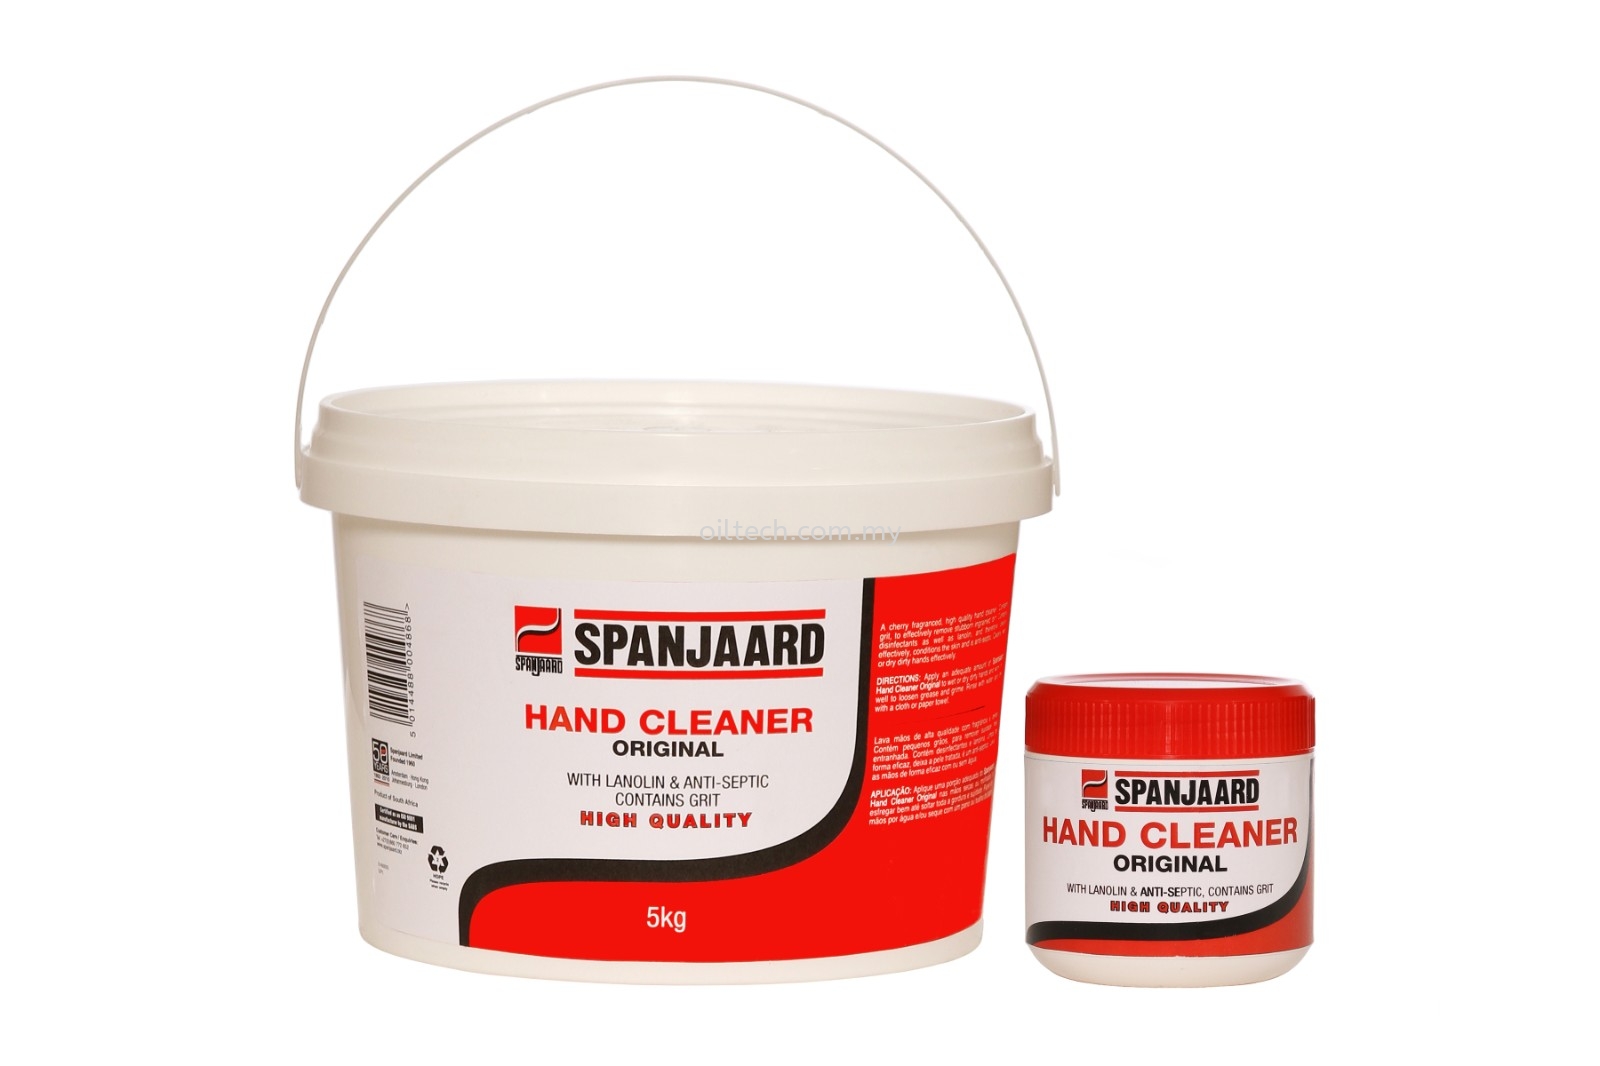 CONTACT CLEANER - Spanjaard  Quality Supplier of Special Lubricants and  Chemical Products